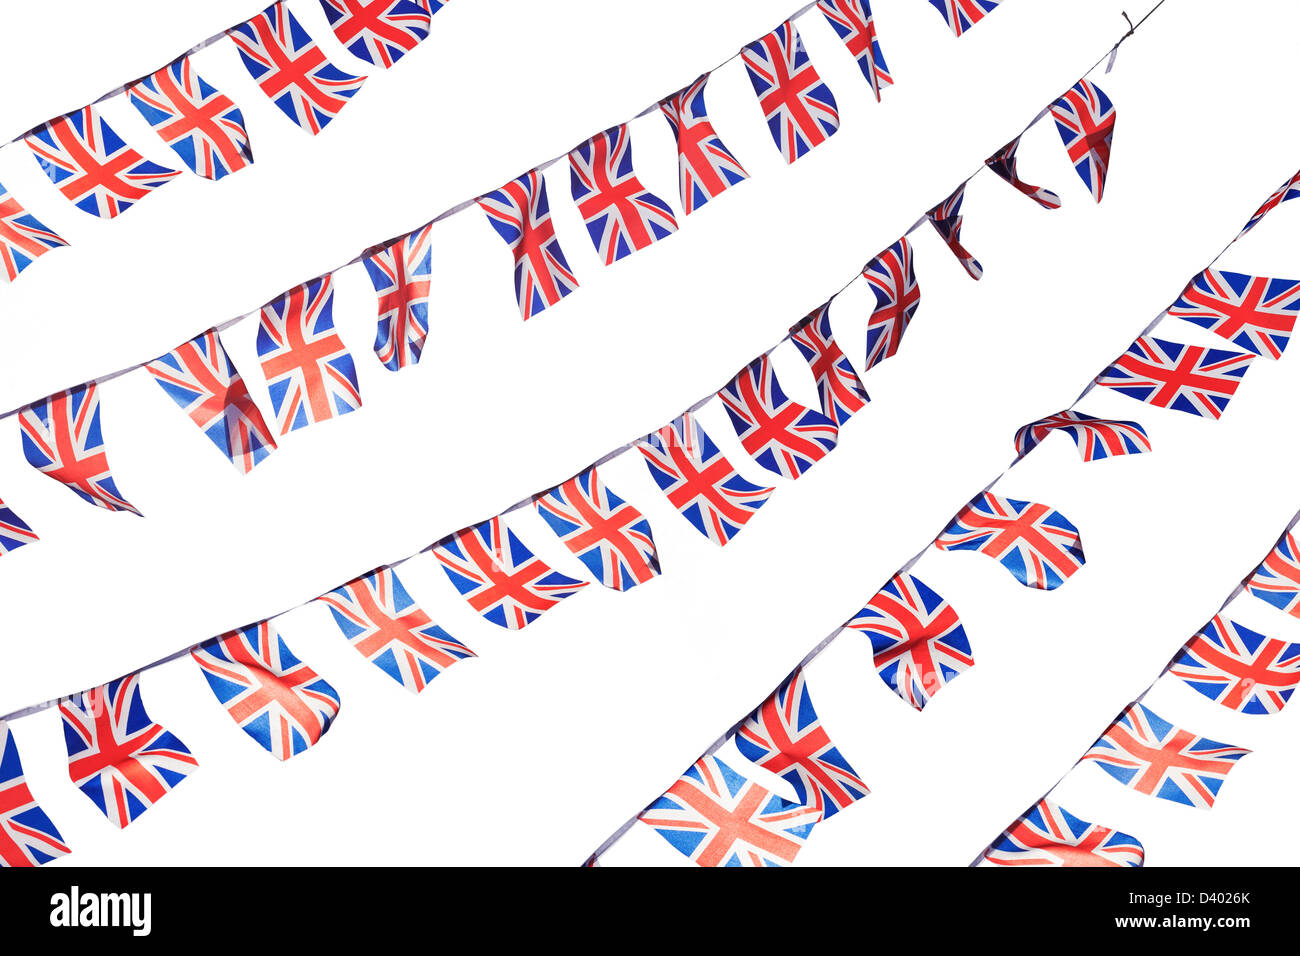 UK Union flag bunting flapping in the wind isolated on a white background Stock Photo